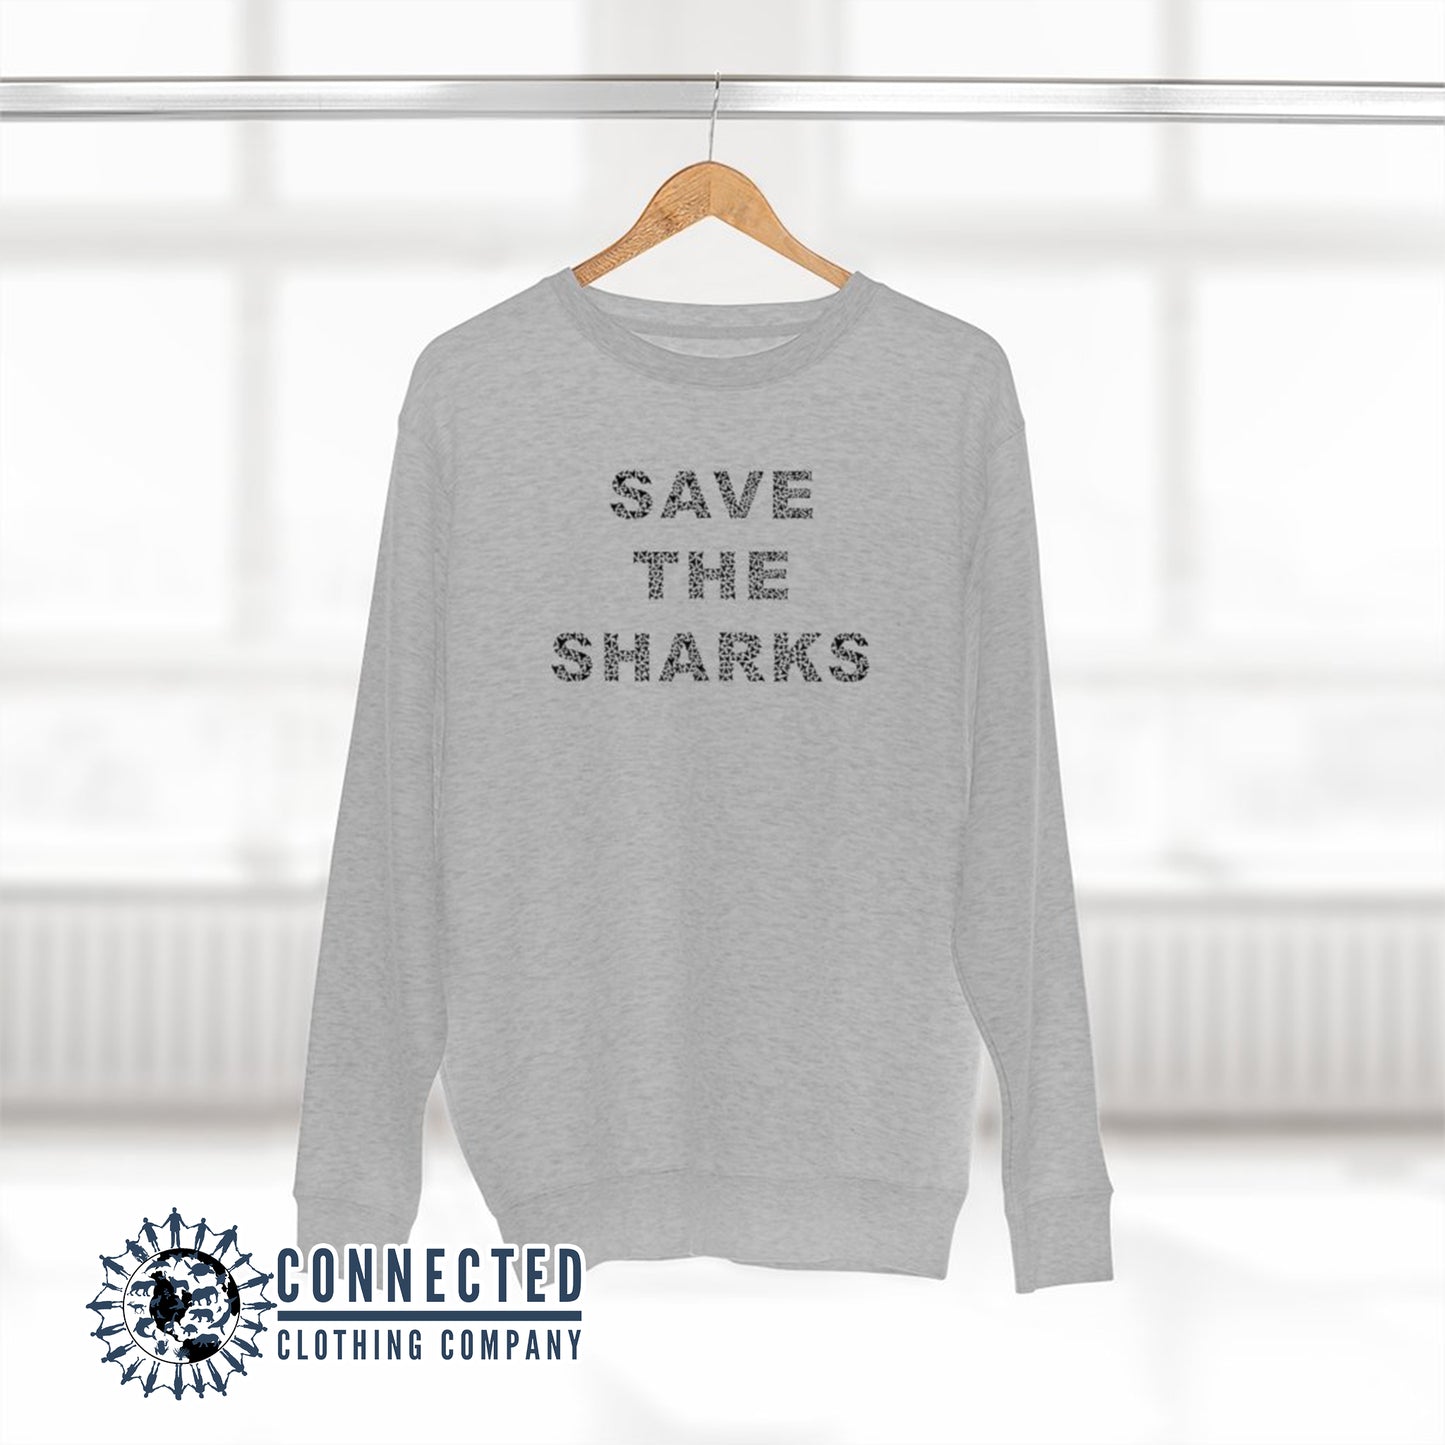 Heather Grey Save The Sharks Unisex Crewneck Sweatshirt - Connected Clothing Company - Ethically and Sustainably Made - 10% of profits donated to shark conservation and ocean conservation